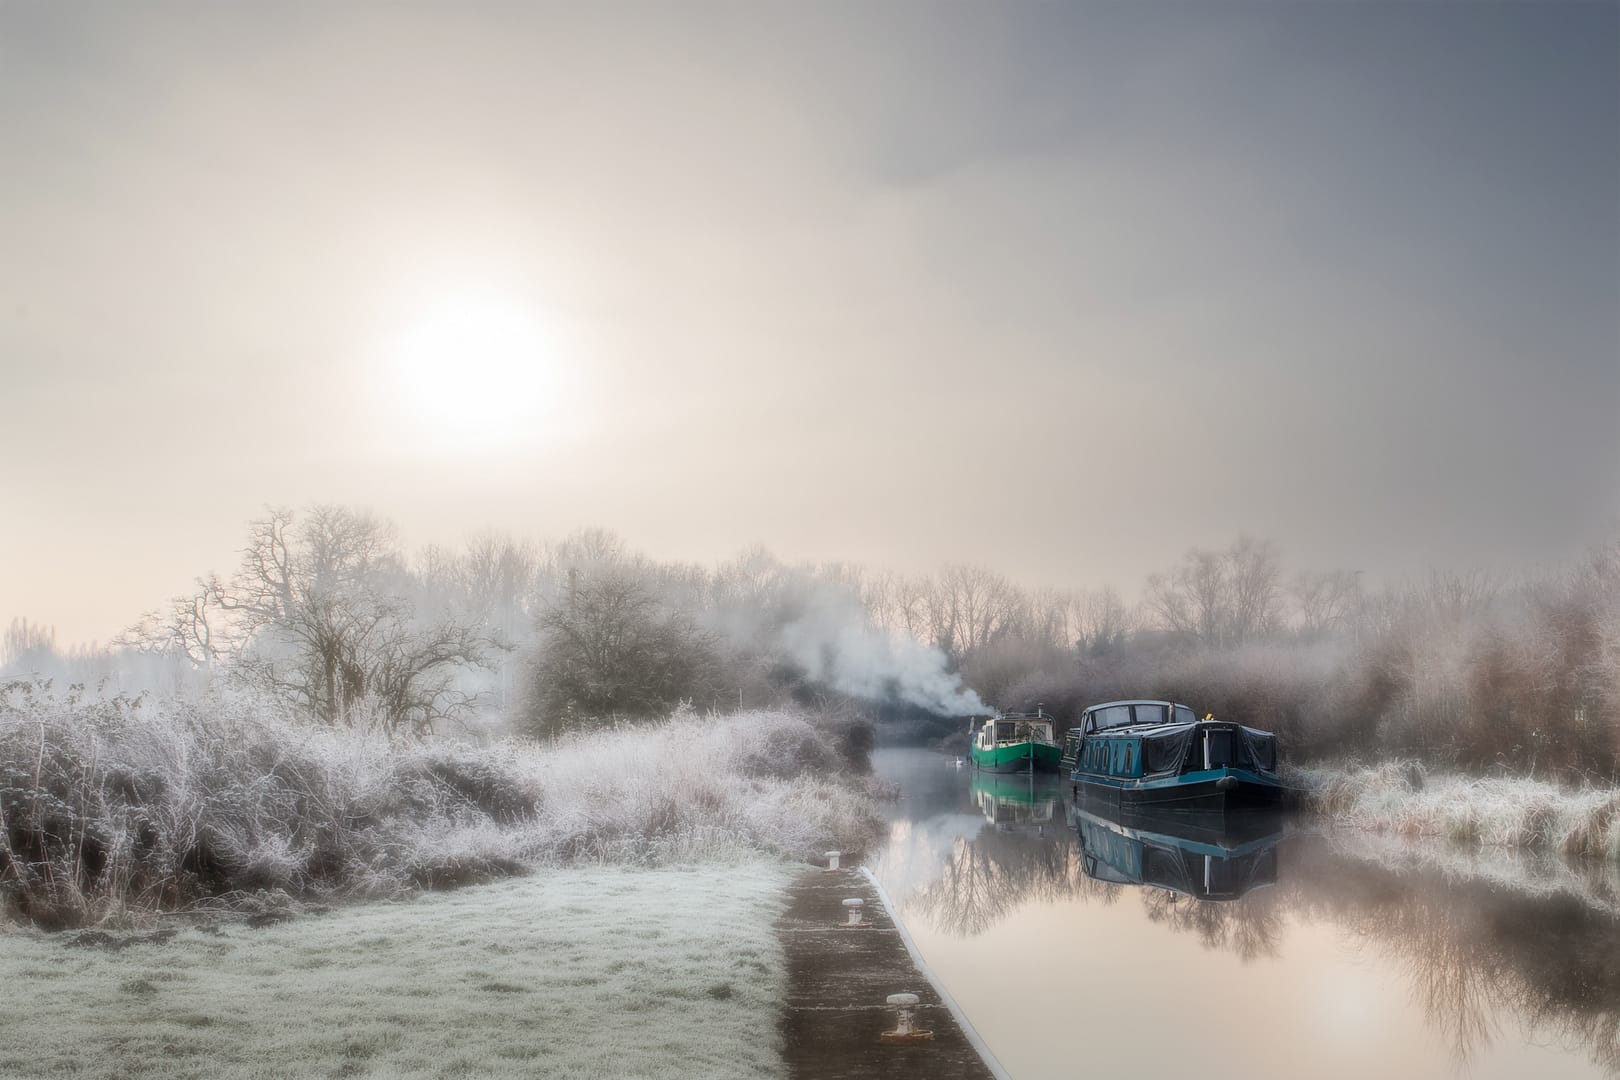 Winter Day on the Kennet and Avon Canal.